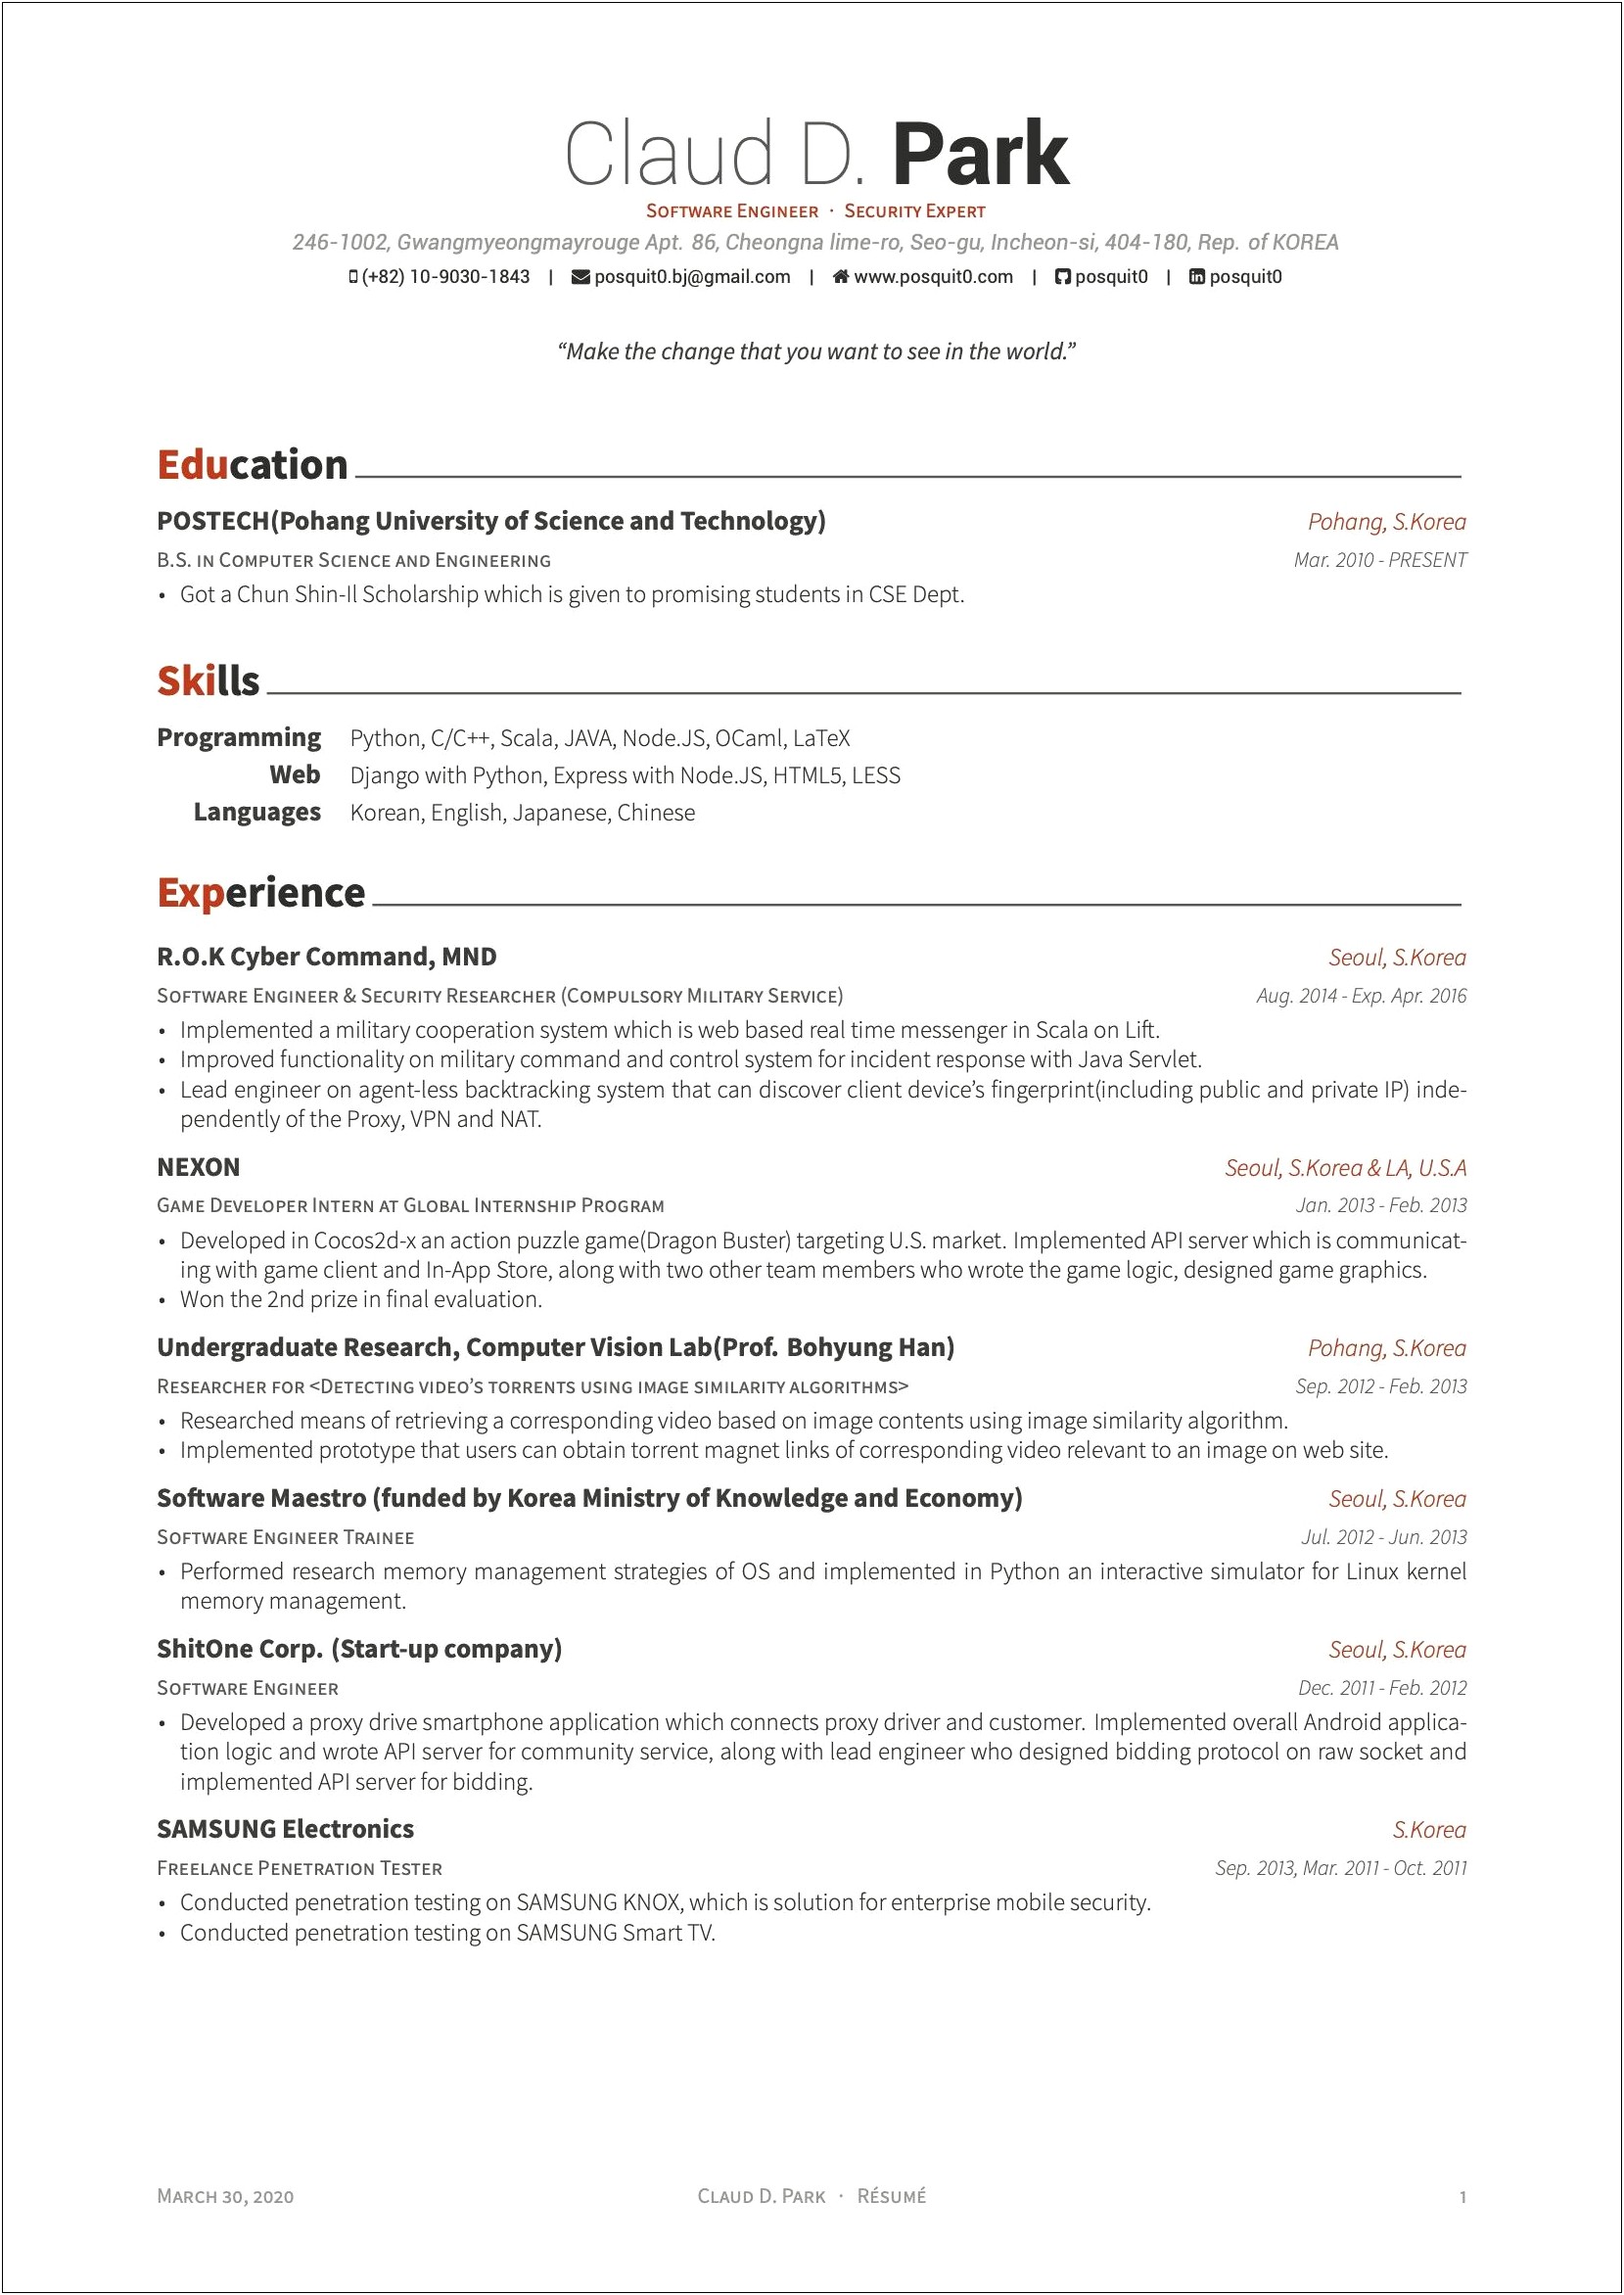 Download Cv Template For Phd Application.doc